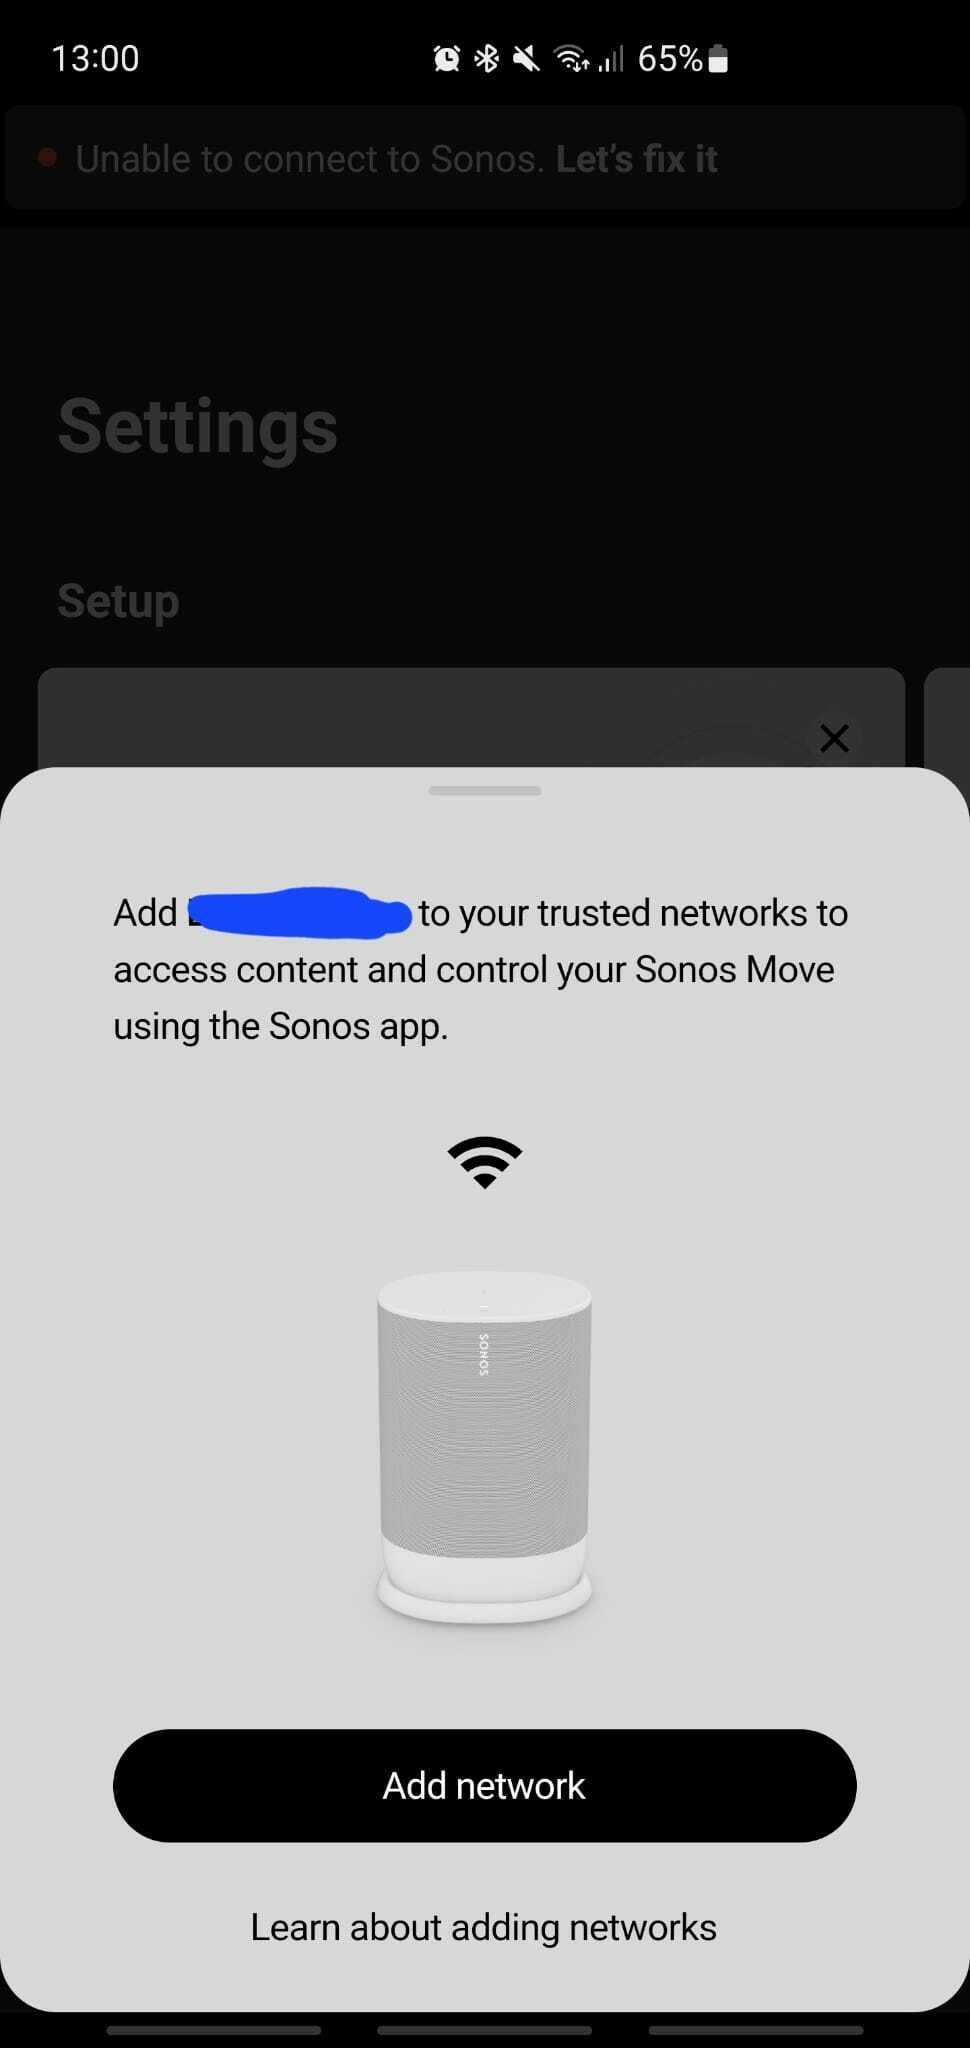 Tectonic snak bue Sonos Move - Move between home and work network (different wifi networks) |  Sonos Community